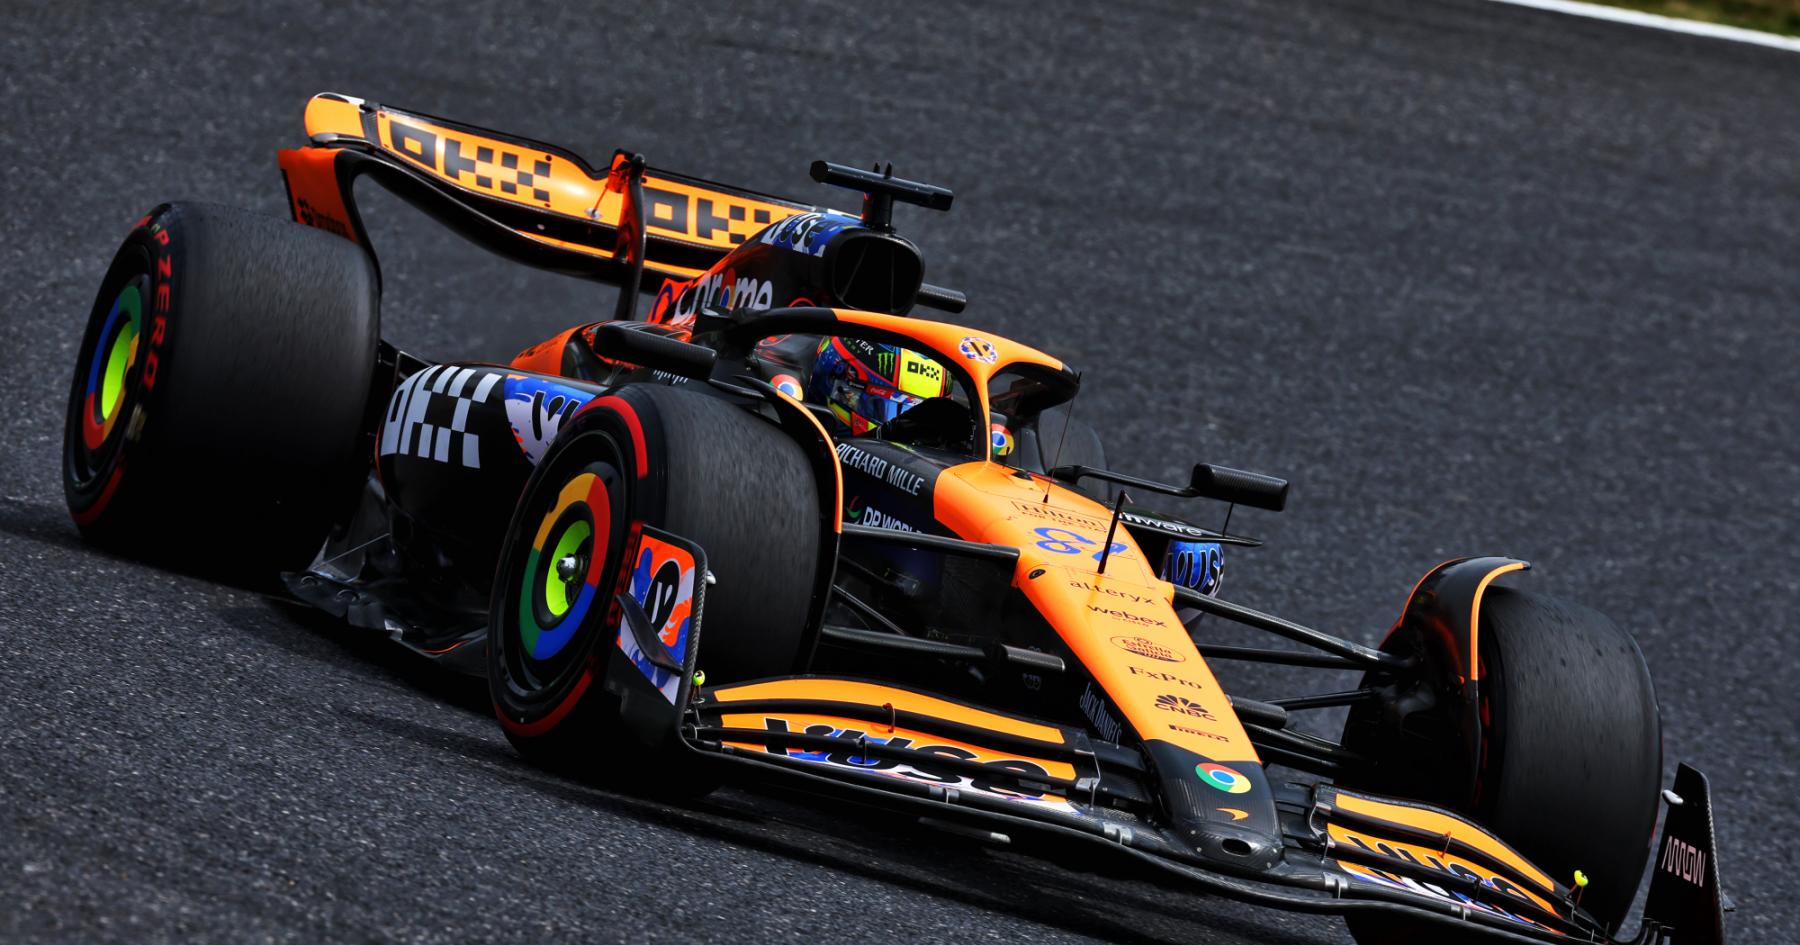 The Formula One Rivalry: Piastri's Perspective on McLaren's Qualifying Challenge Against Norris